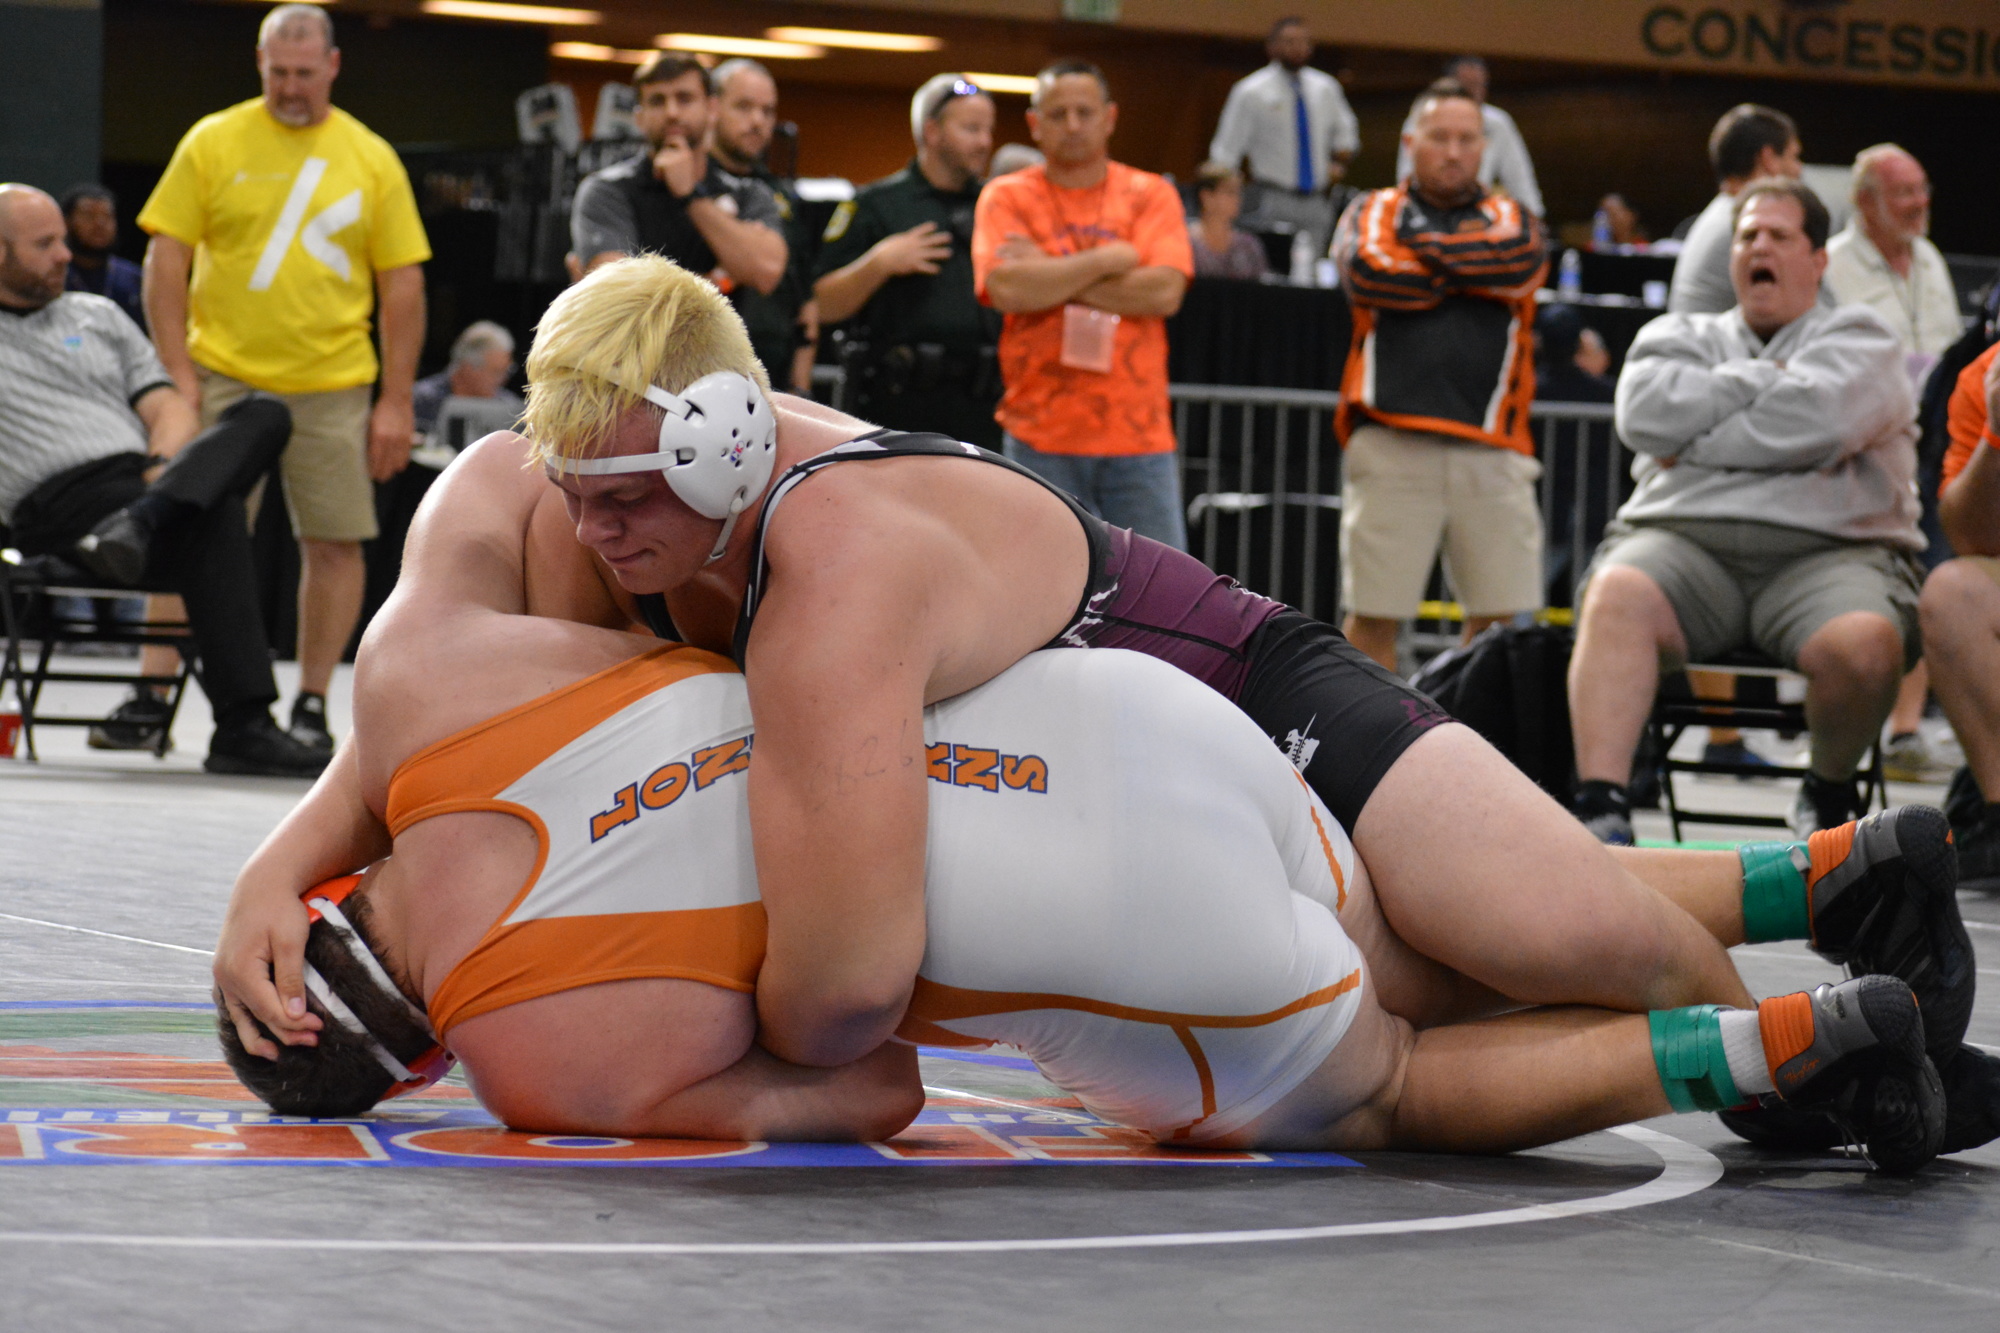 2. Braden River's Brendan Bengtsson gets on top of Carter Harris to secure the 2A, 285-pound wrestling title.